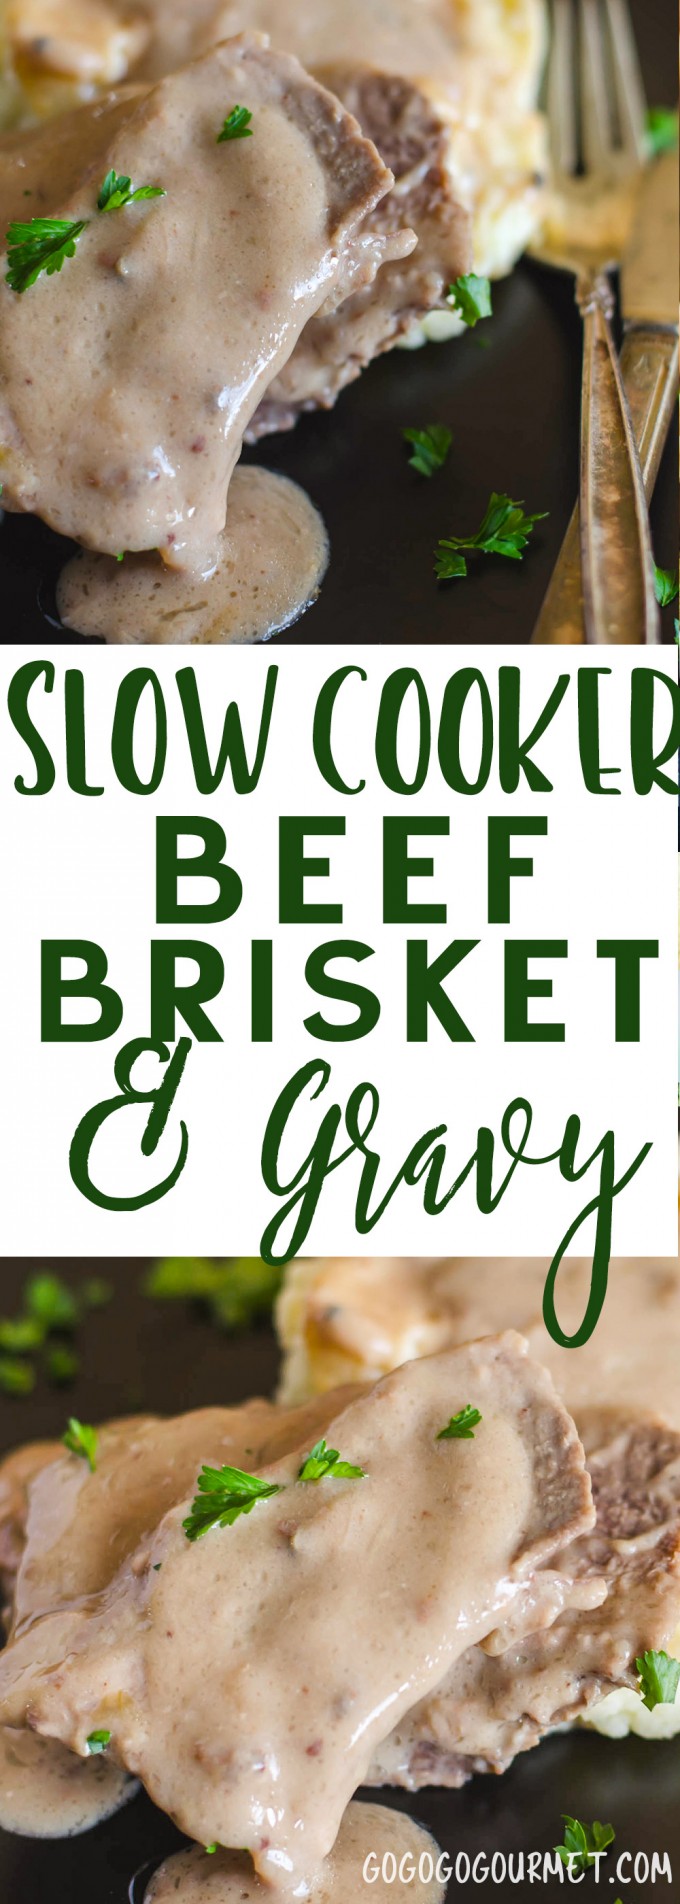 This Slow Cooker Brisket and Gravy can be done in the oven or a slow cooker. A four ingredient recipe from my grandmother's archives! via @gogogogourmet